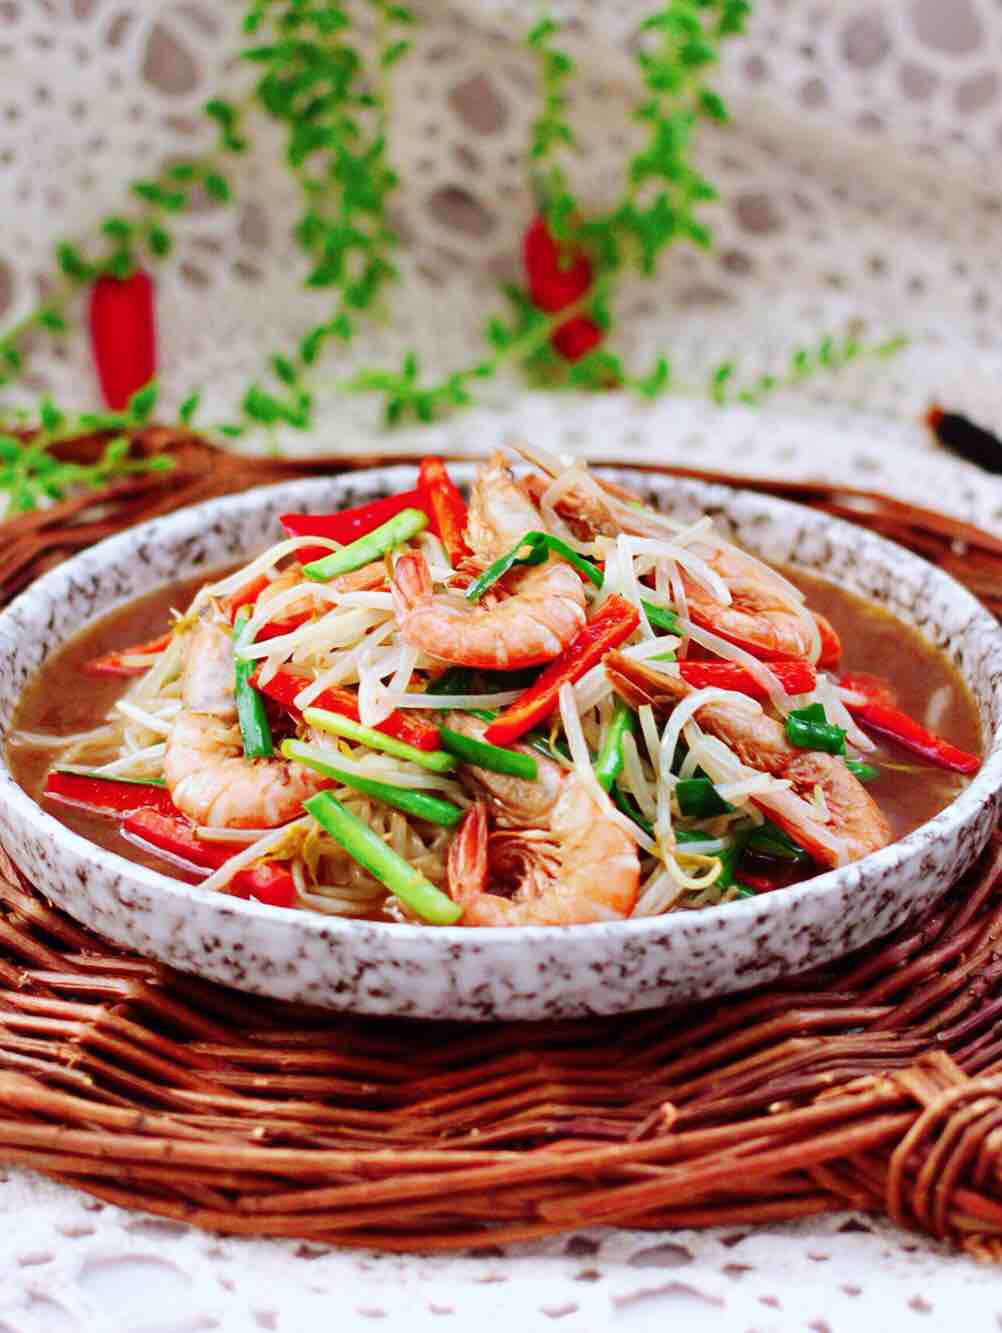 Stir-fried Red Shrimp with Mung Bean Sprouts recipe